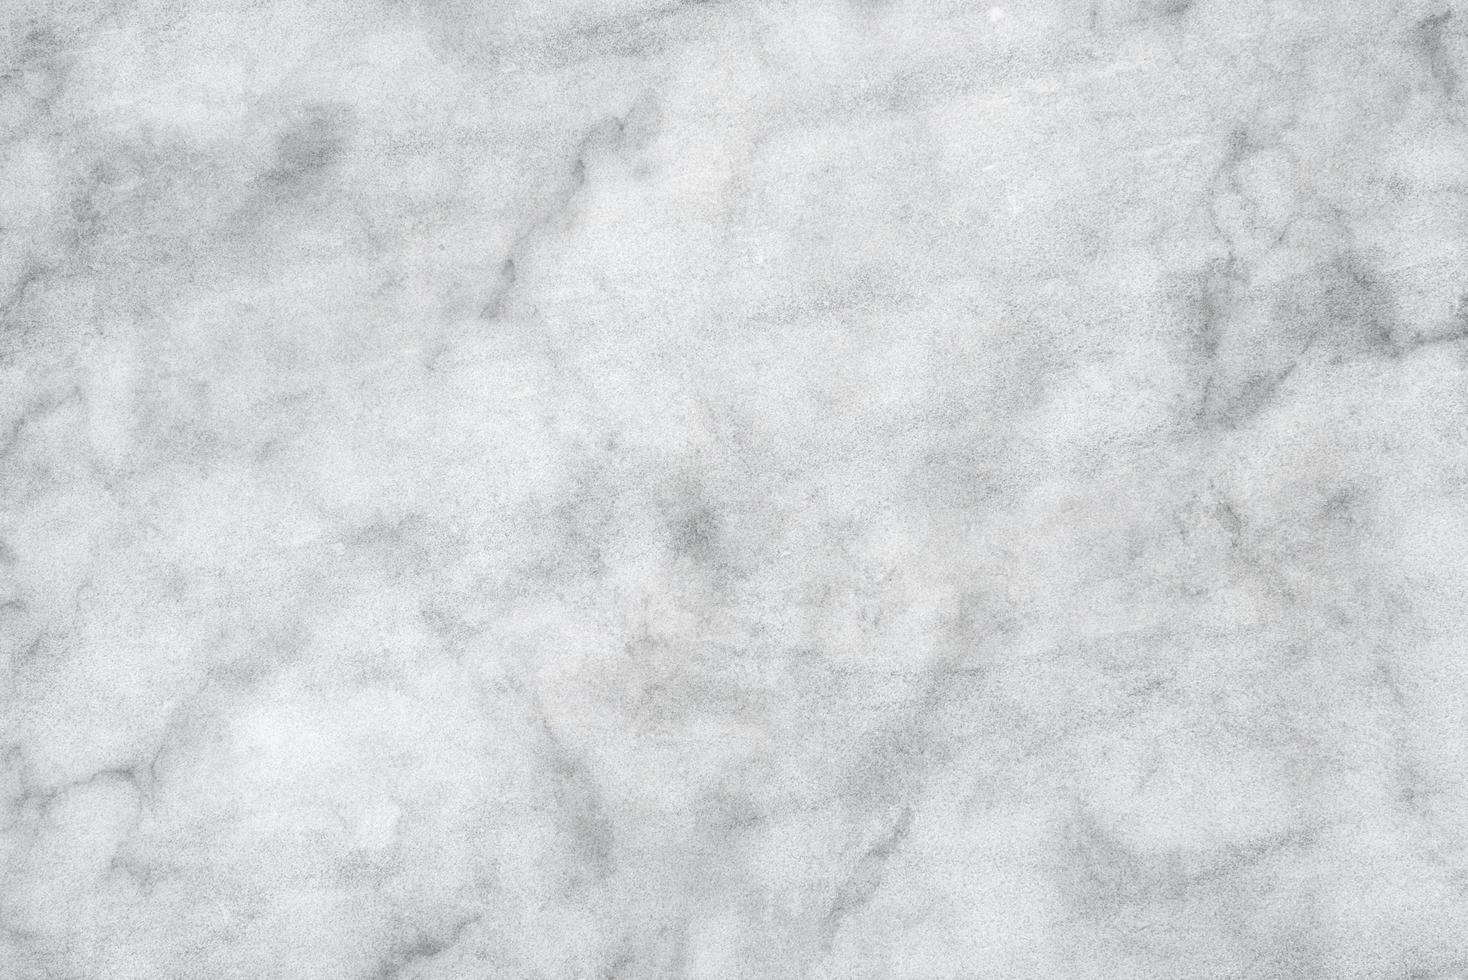 Marble patterned texture photo